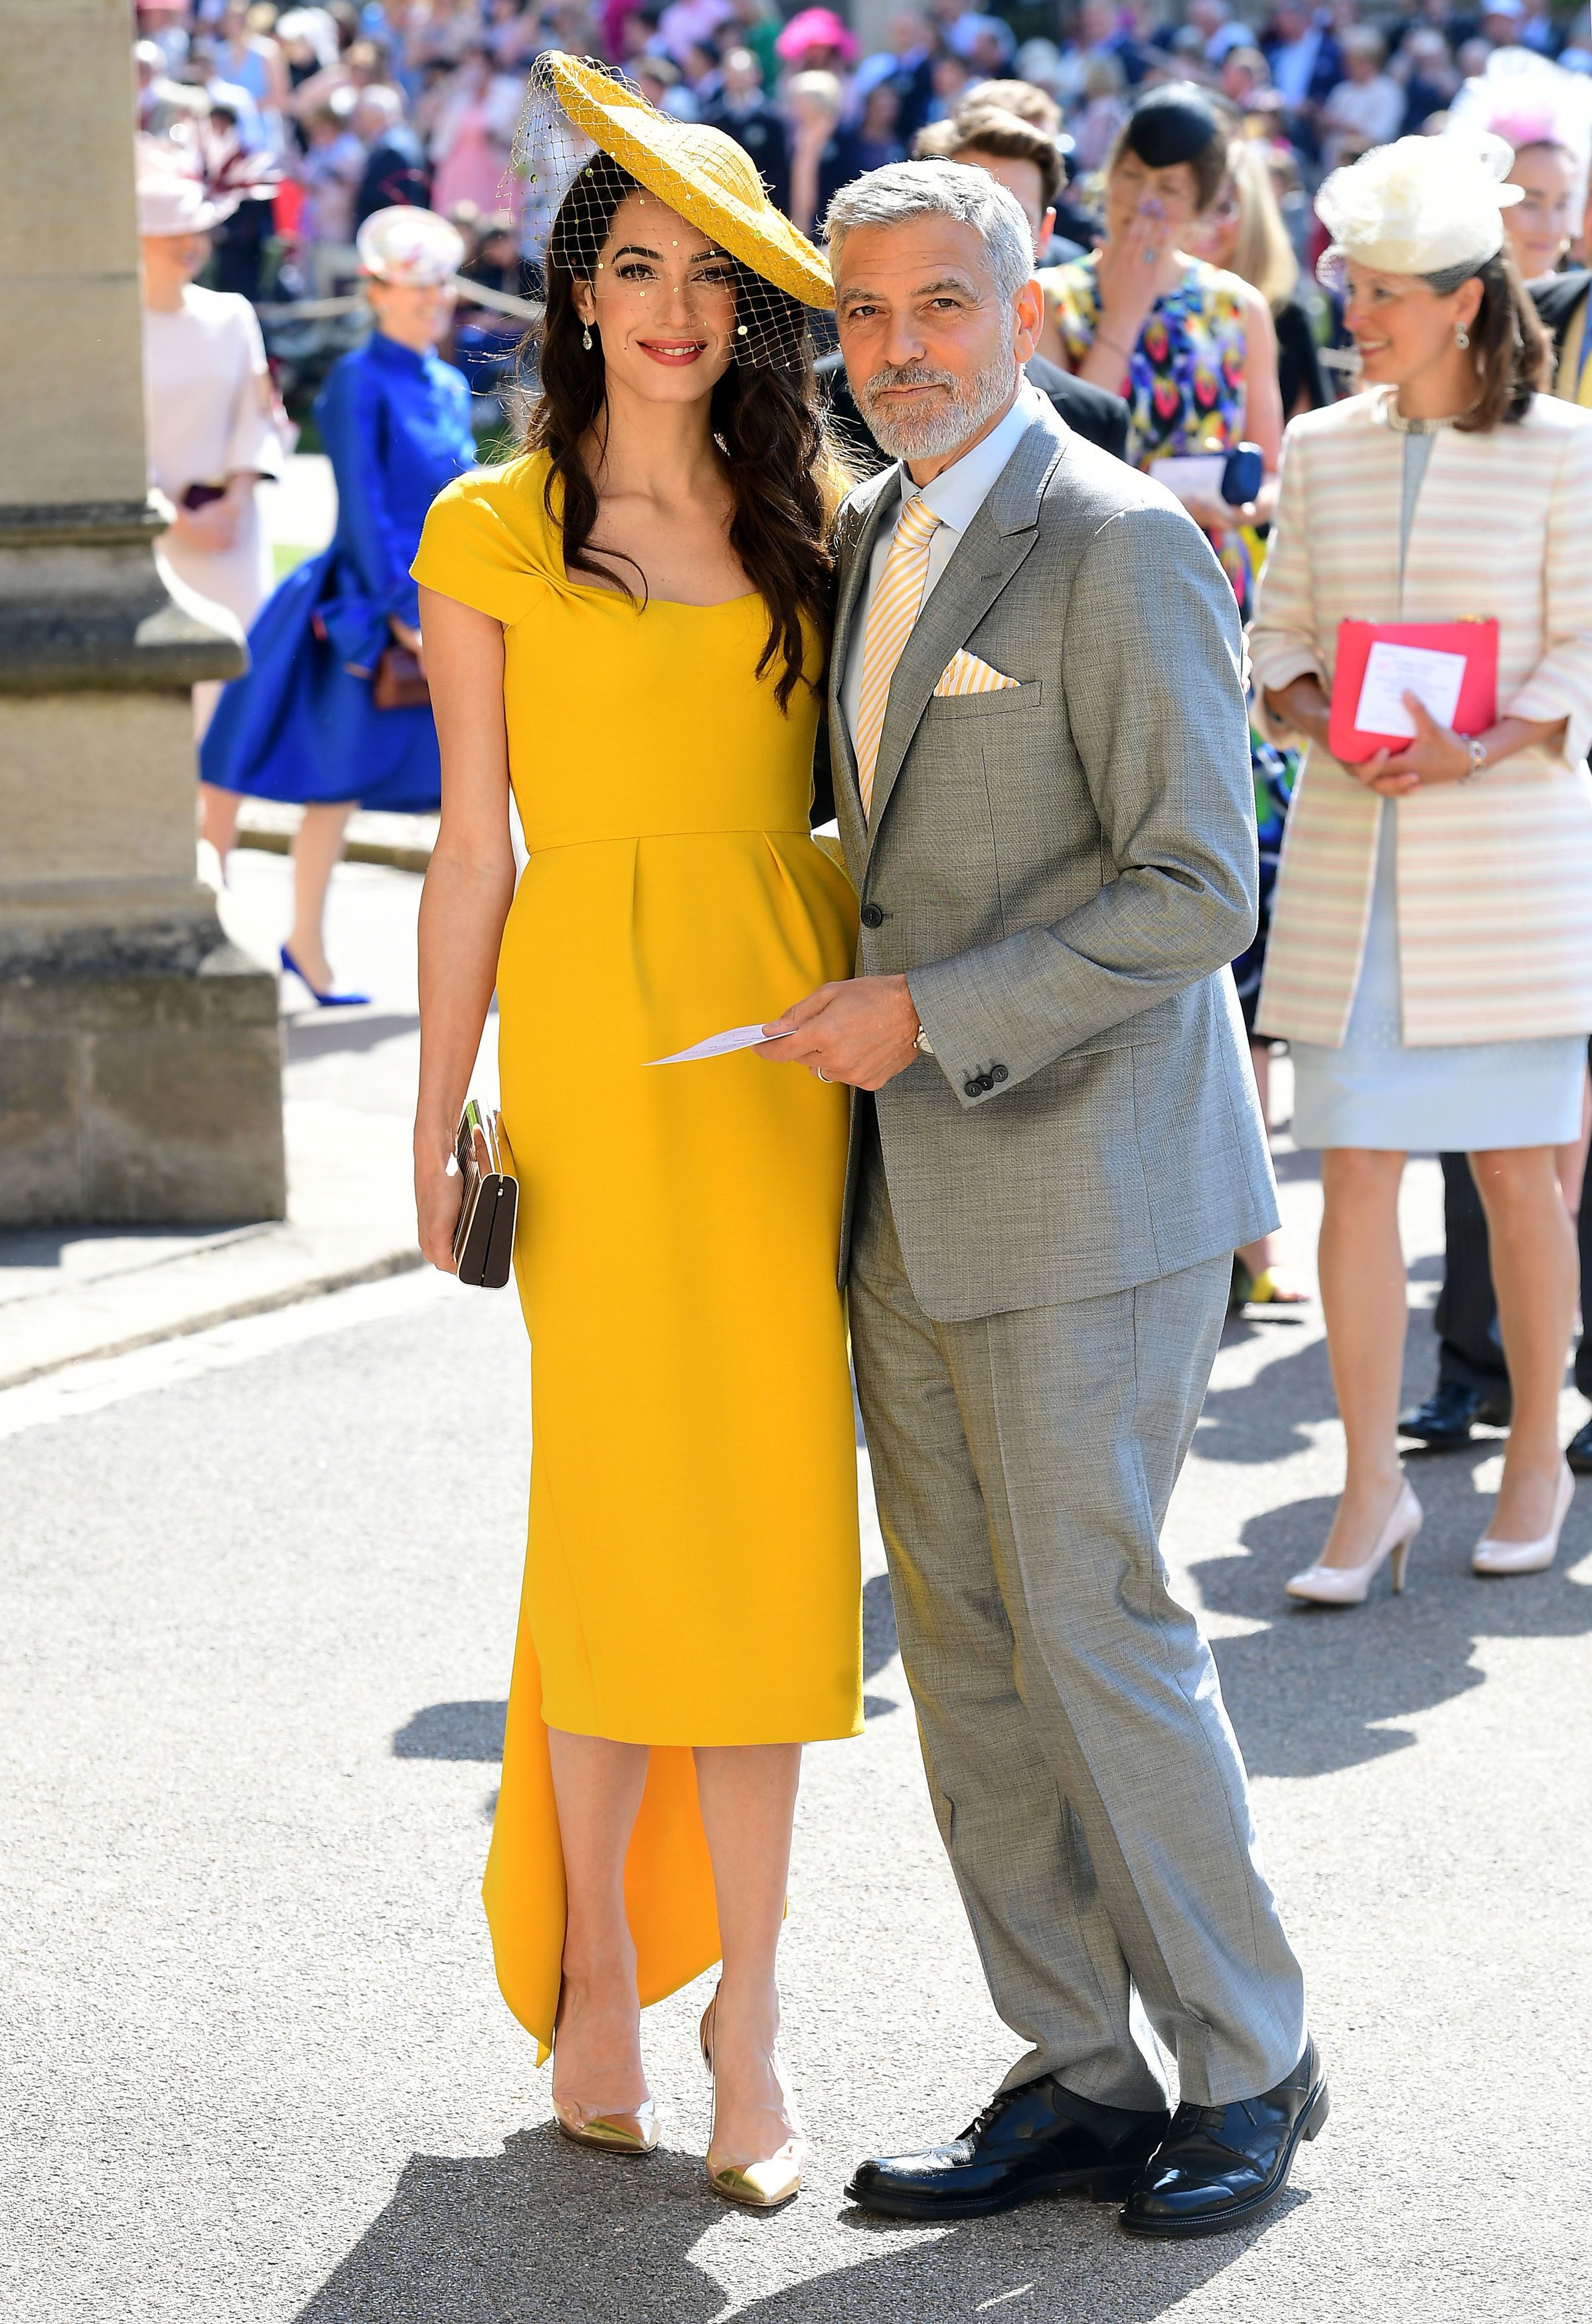 Royal Wedding 2018 Best Dressed Celebrity And Royal Fashion At